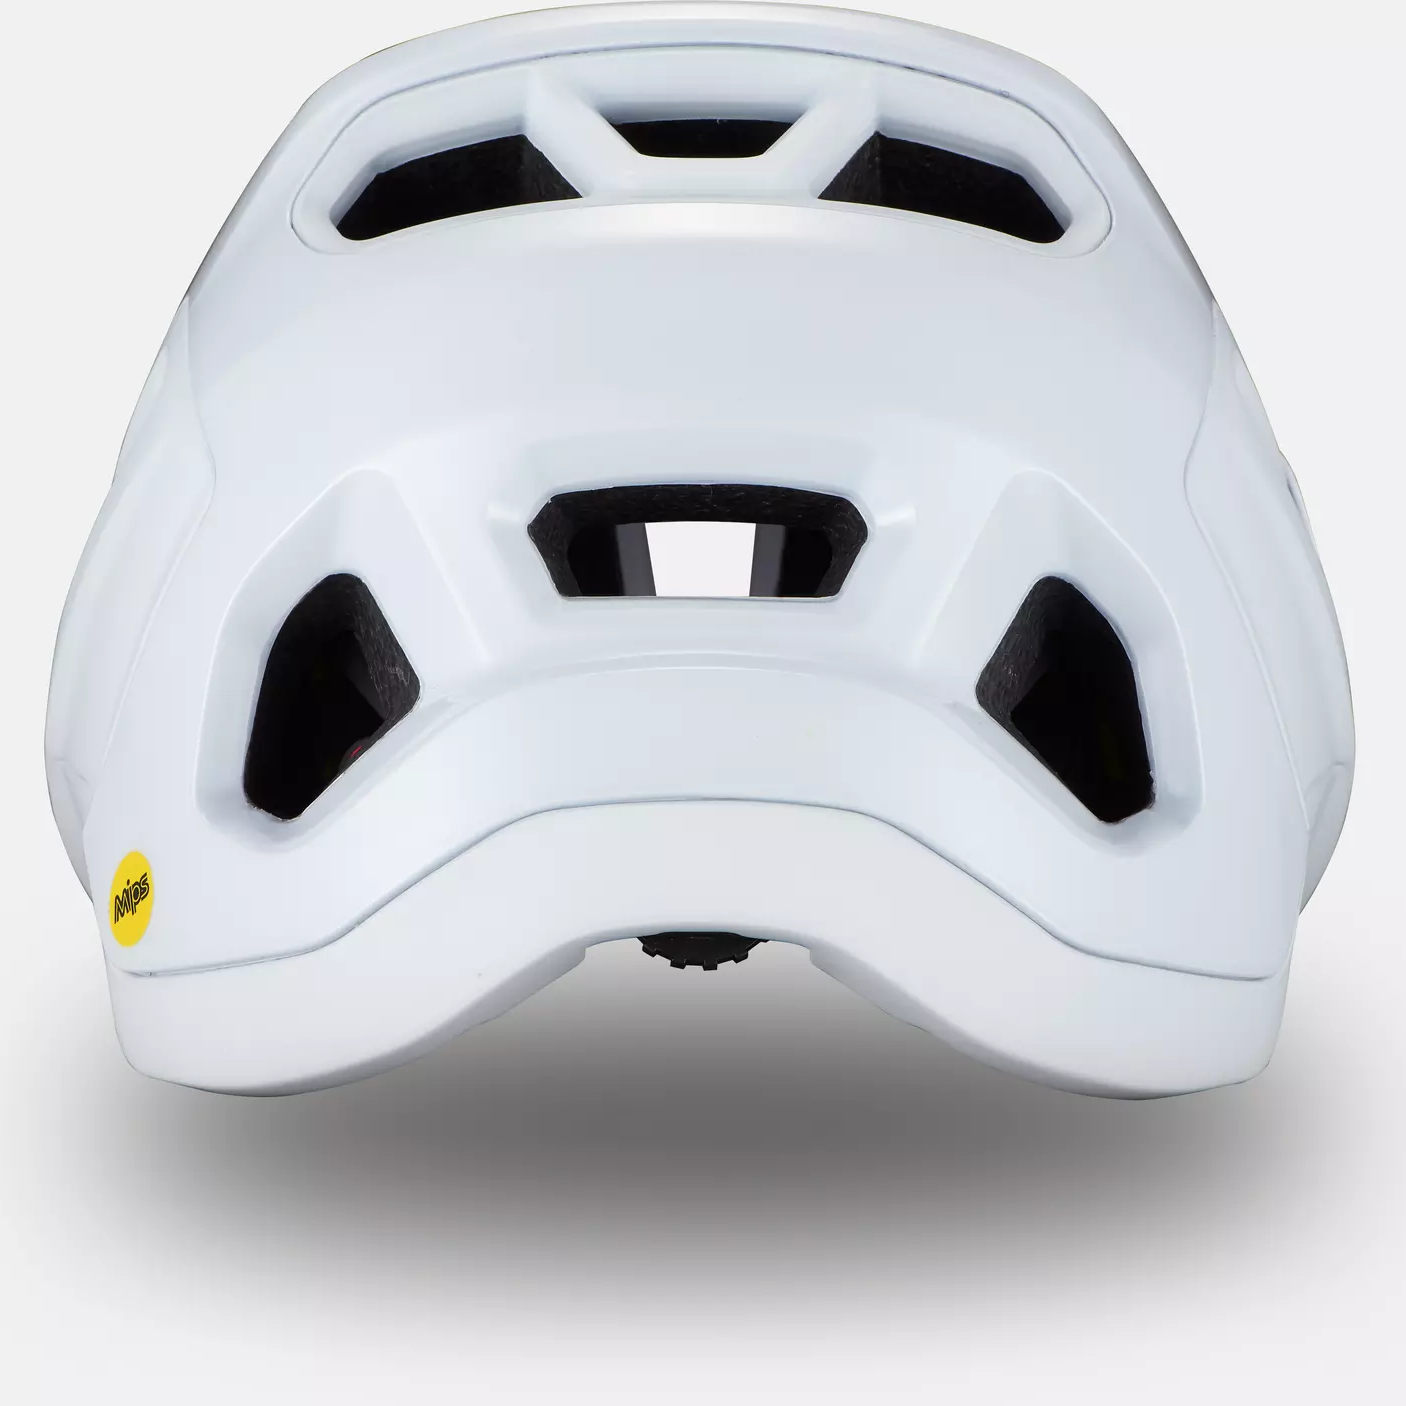 Specialized Tactic 4 MTB Helmet - White